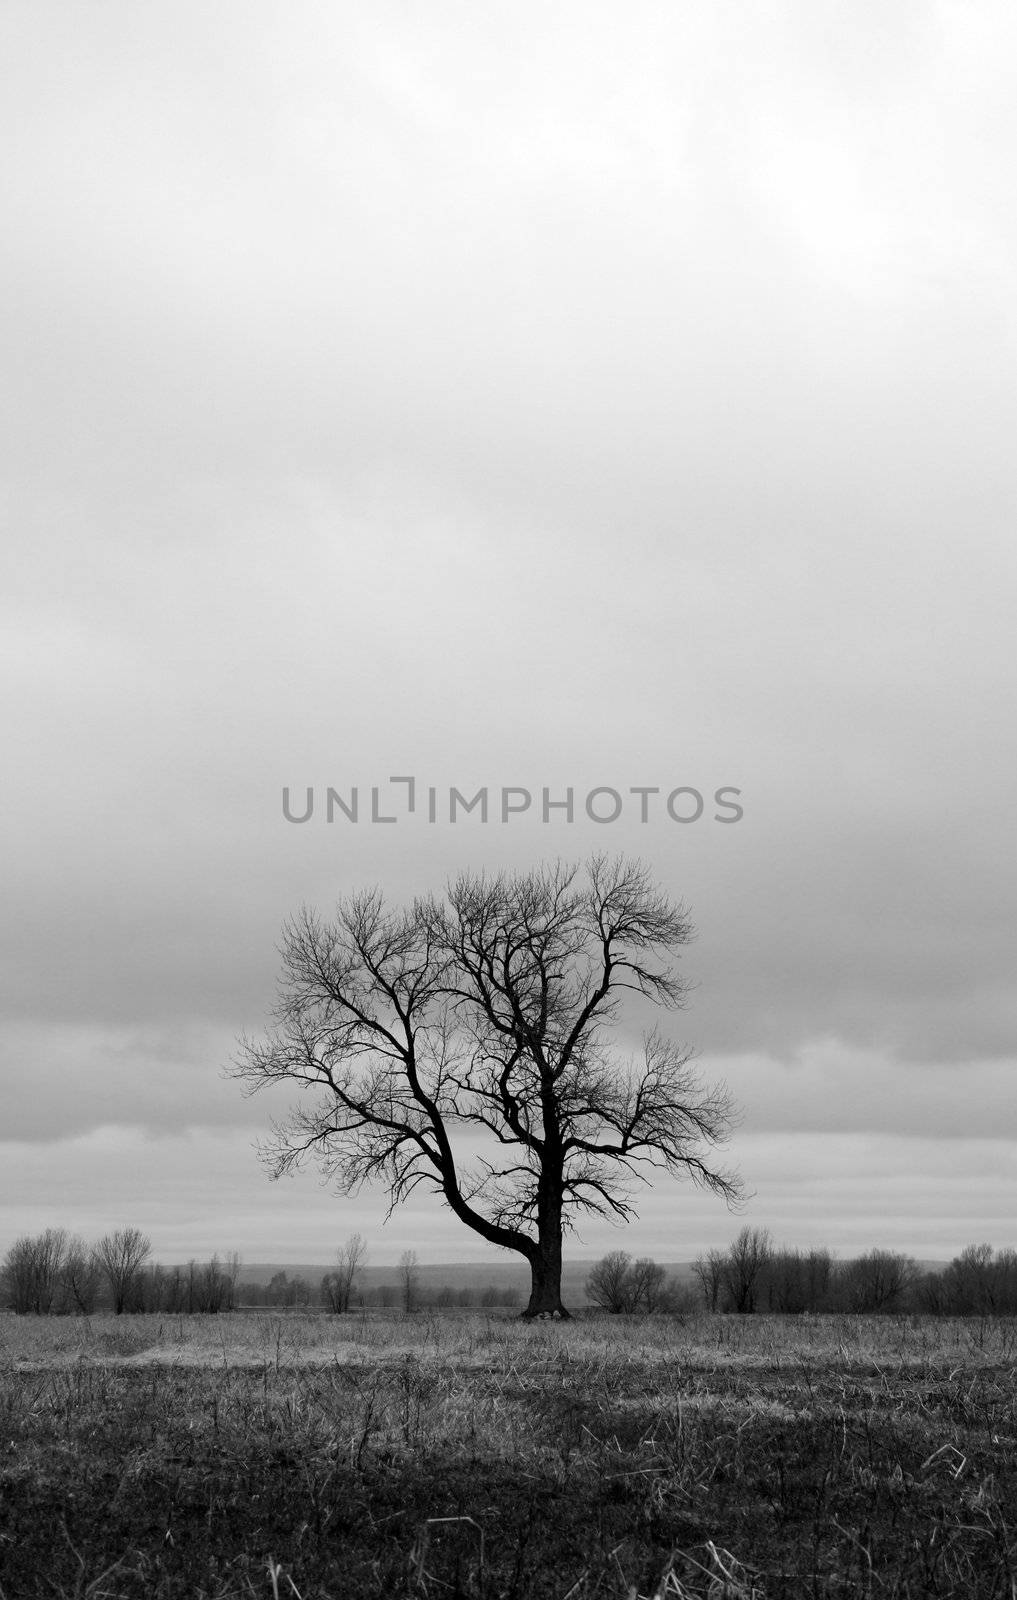 Lonely tree in a spring field. Black and white photo.